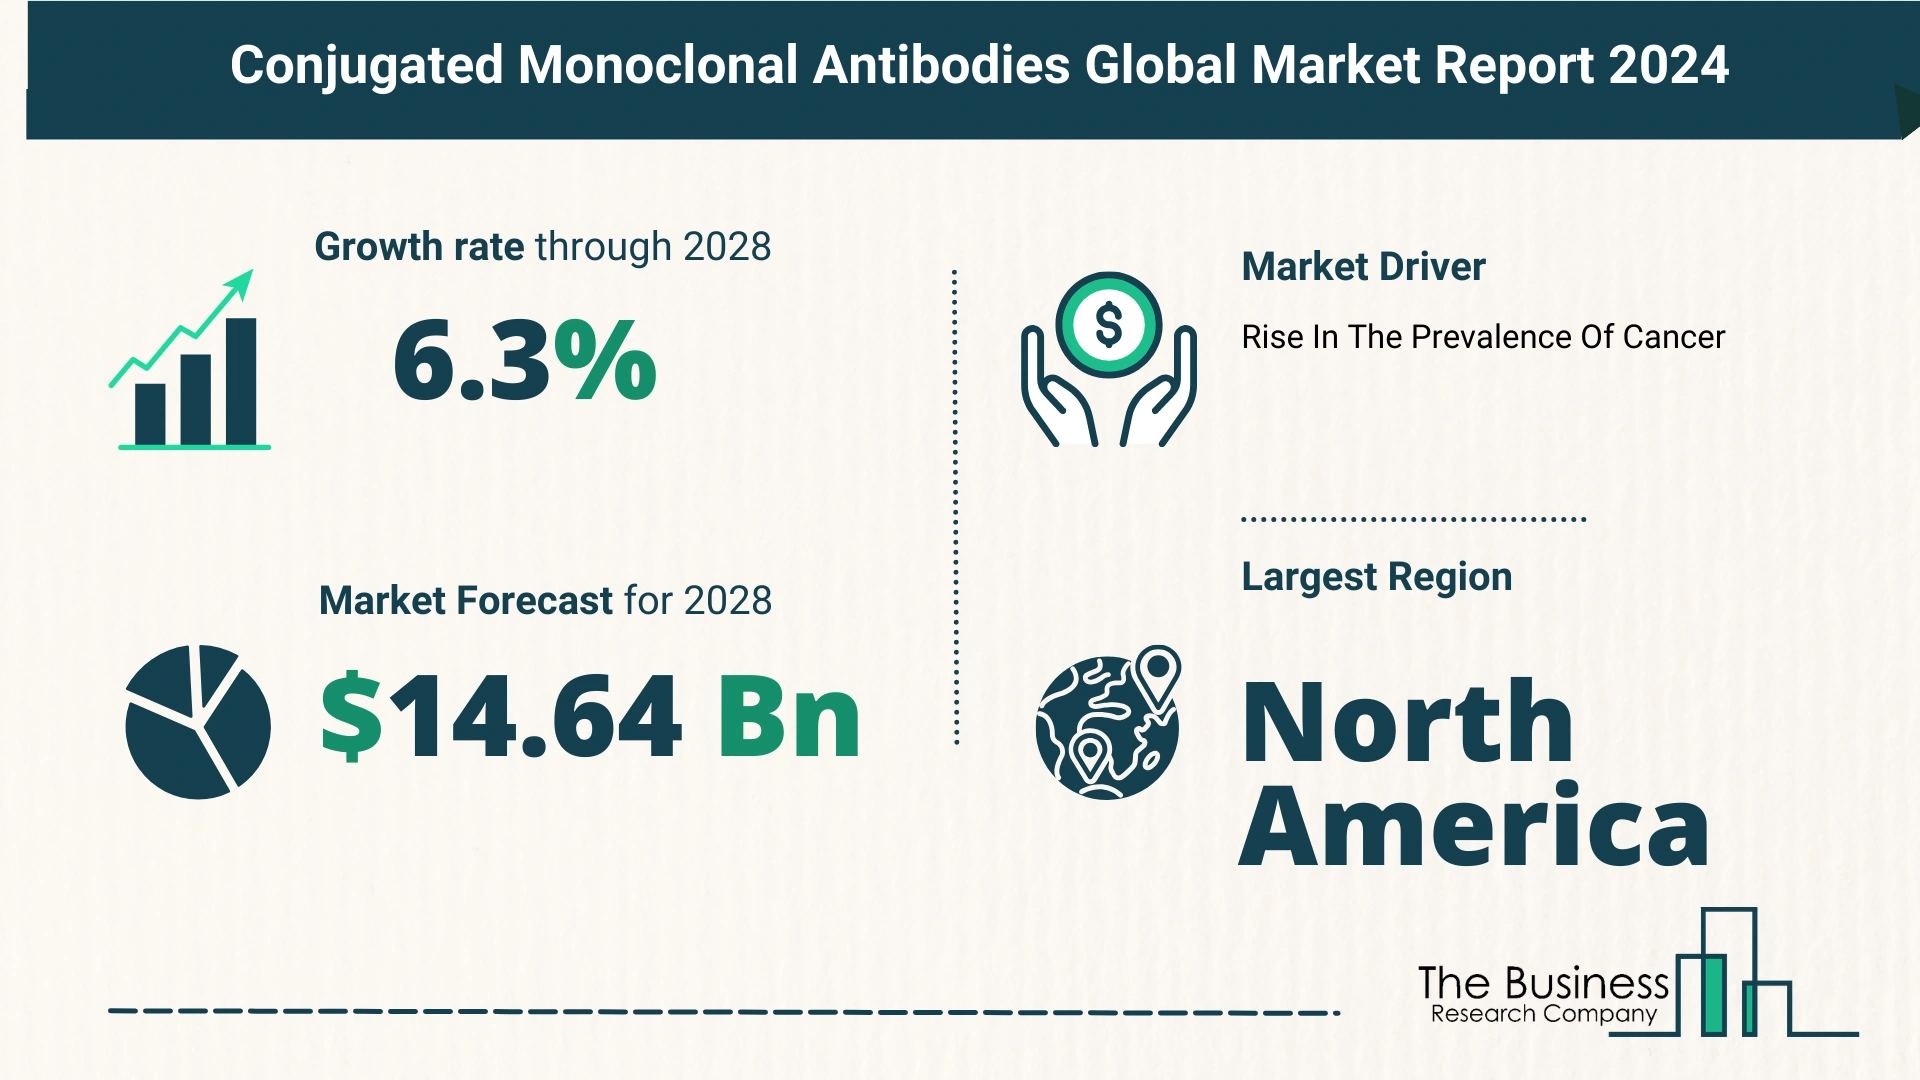 Global Conjugated Monoclonal Antibodies Market Overview 2024: Size, Drivers, And Trends